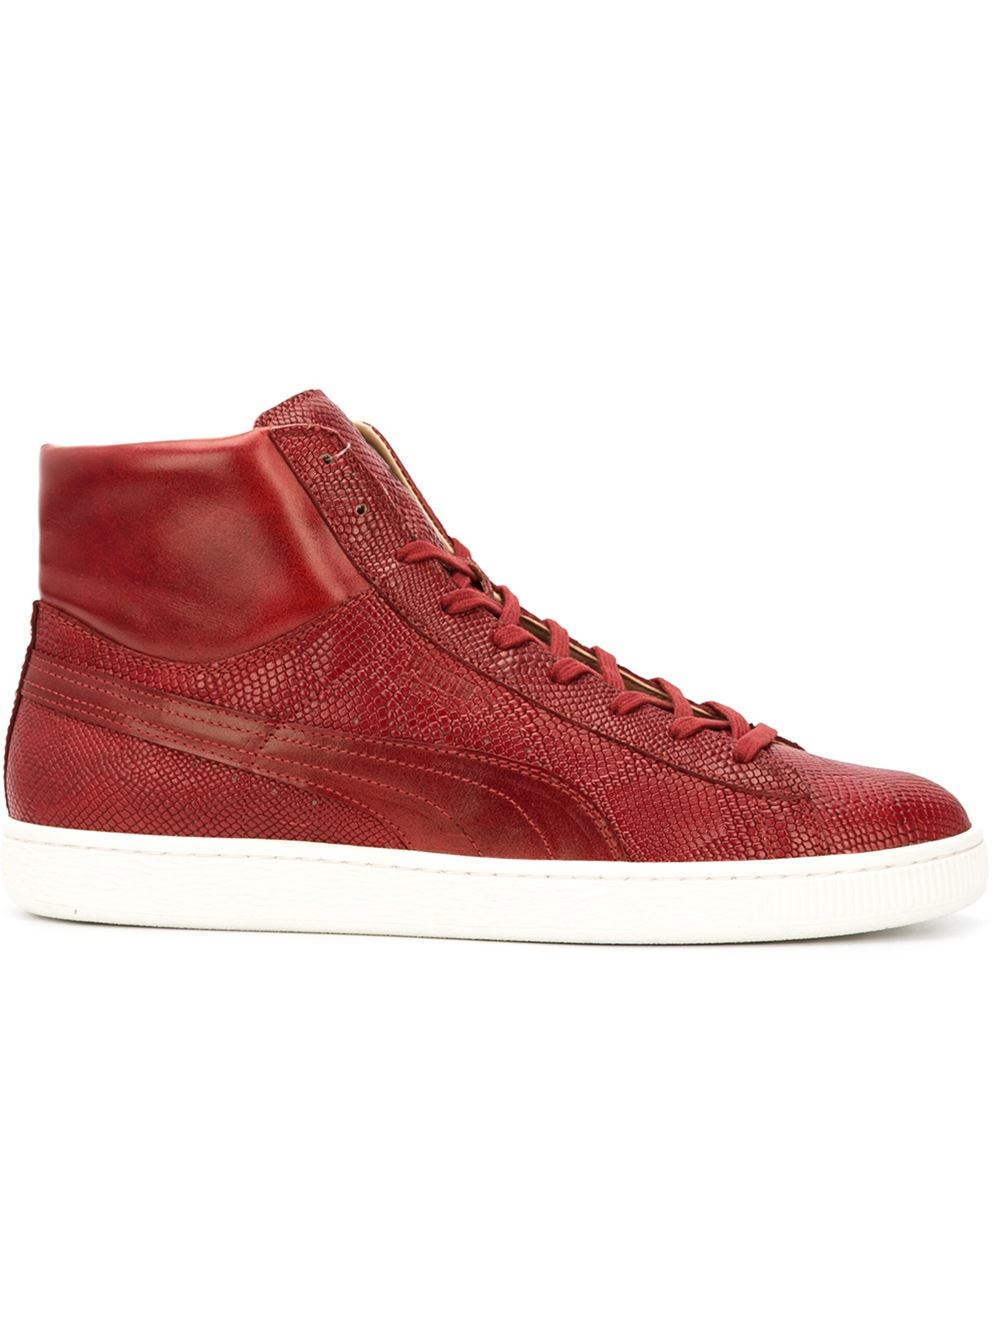 PUMA Leather 'states' Mid-top Sneakers in Red for Men | Lyst